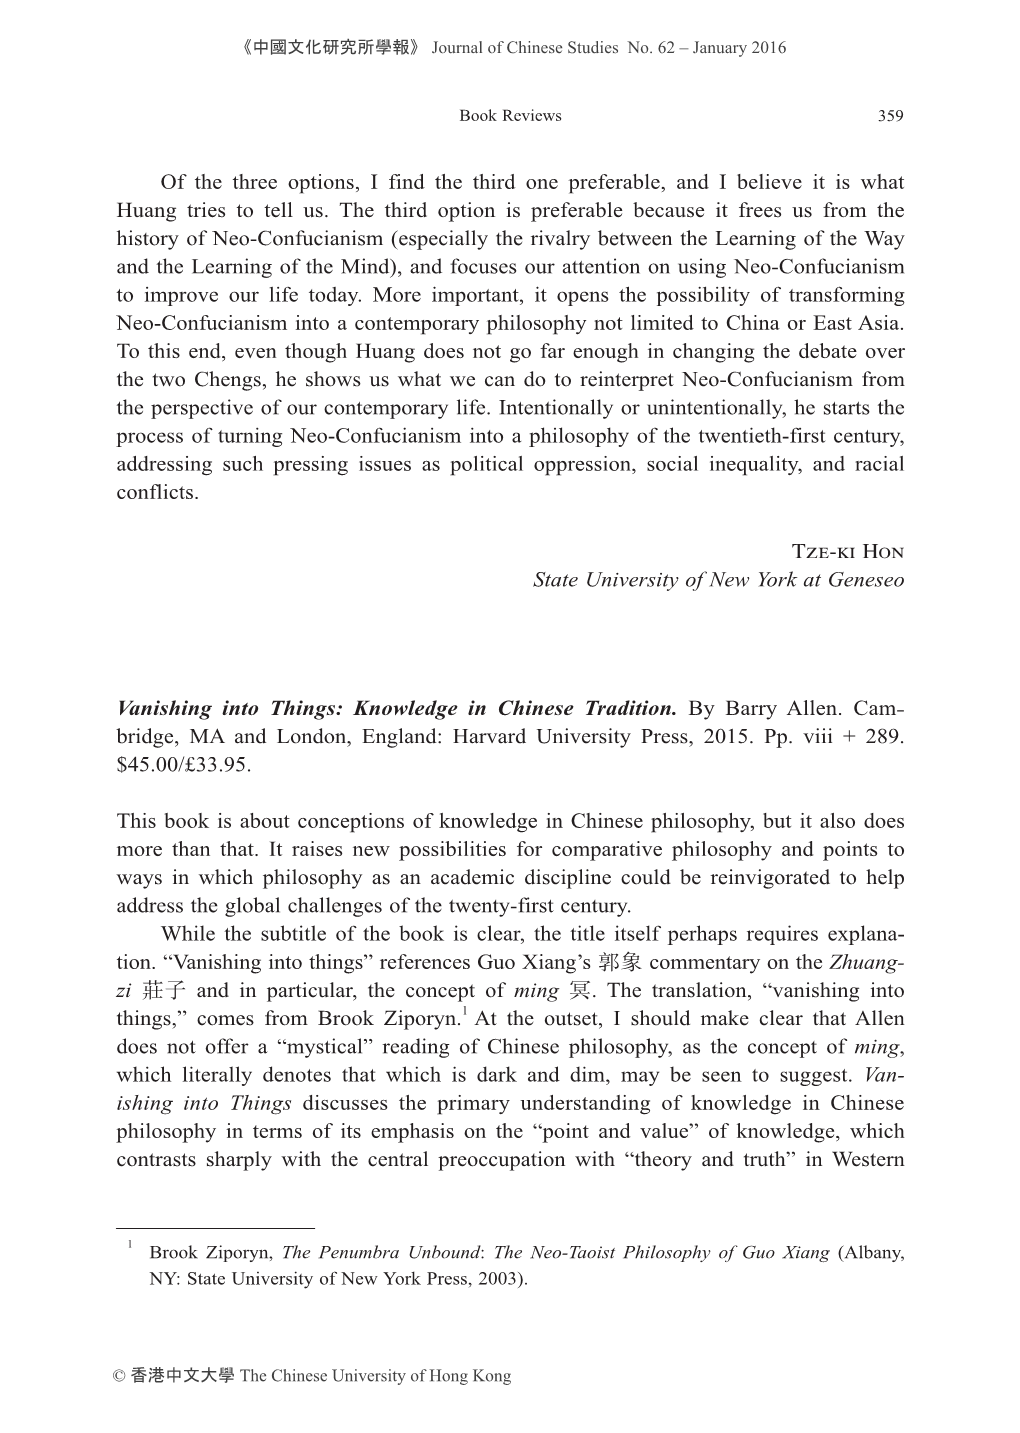 Vanishing Into Things: Knowledge in Chinese Tradition. by Barry Allen